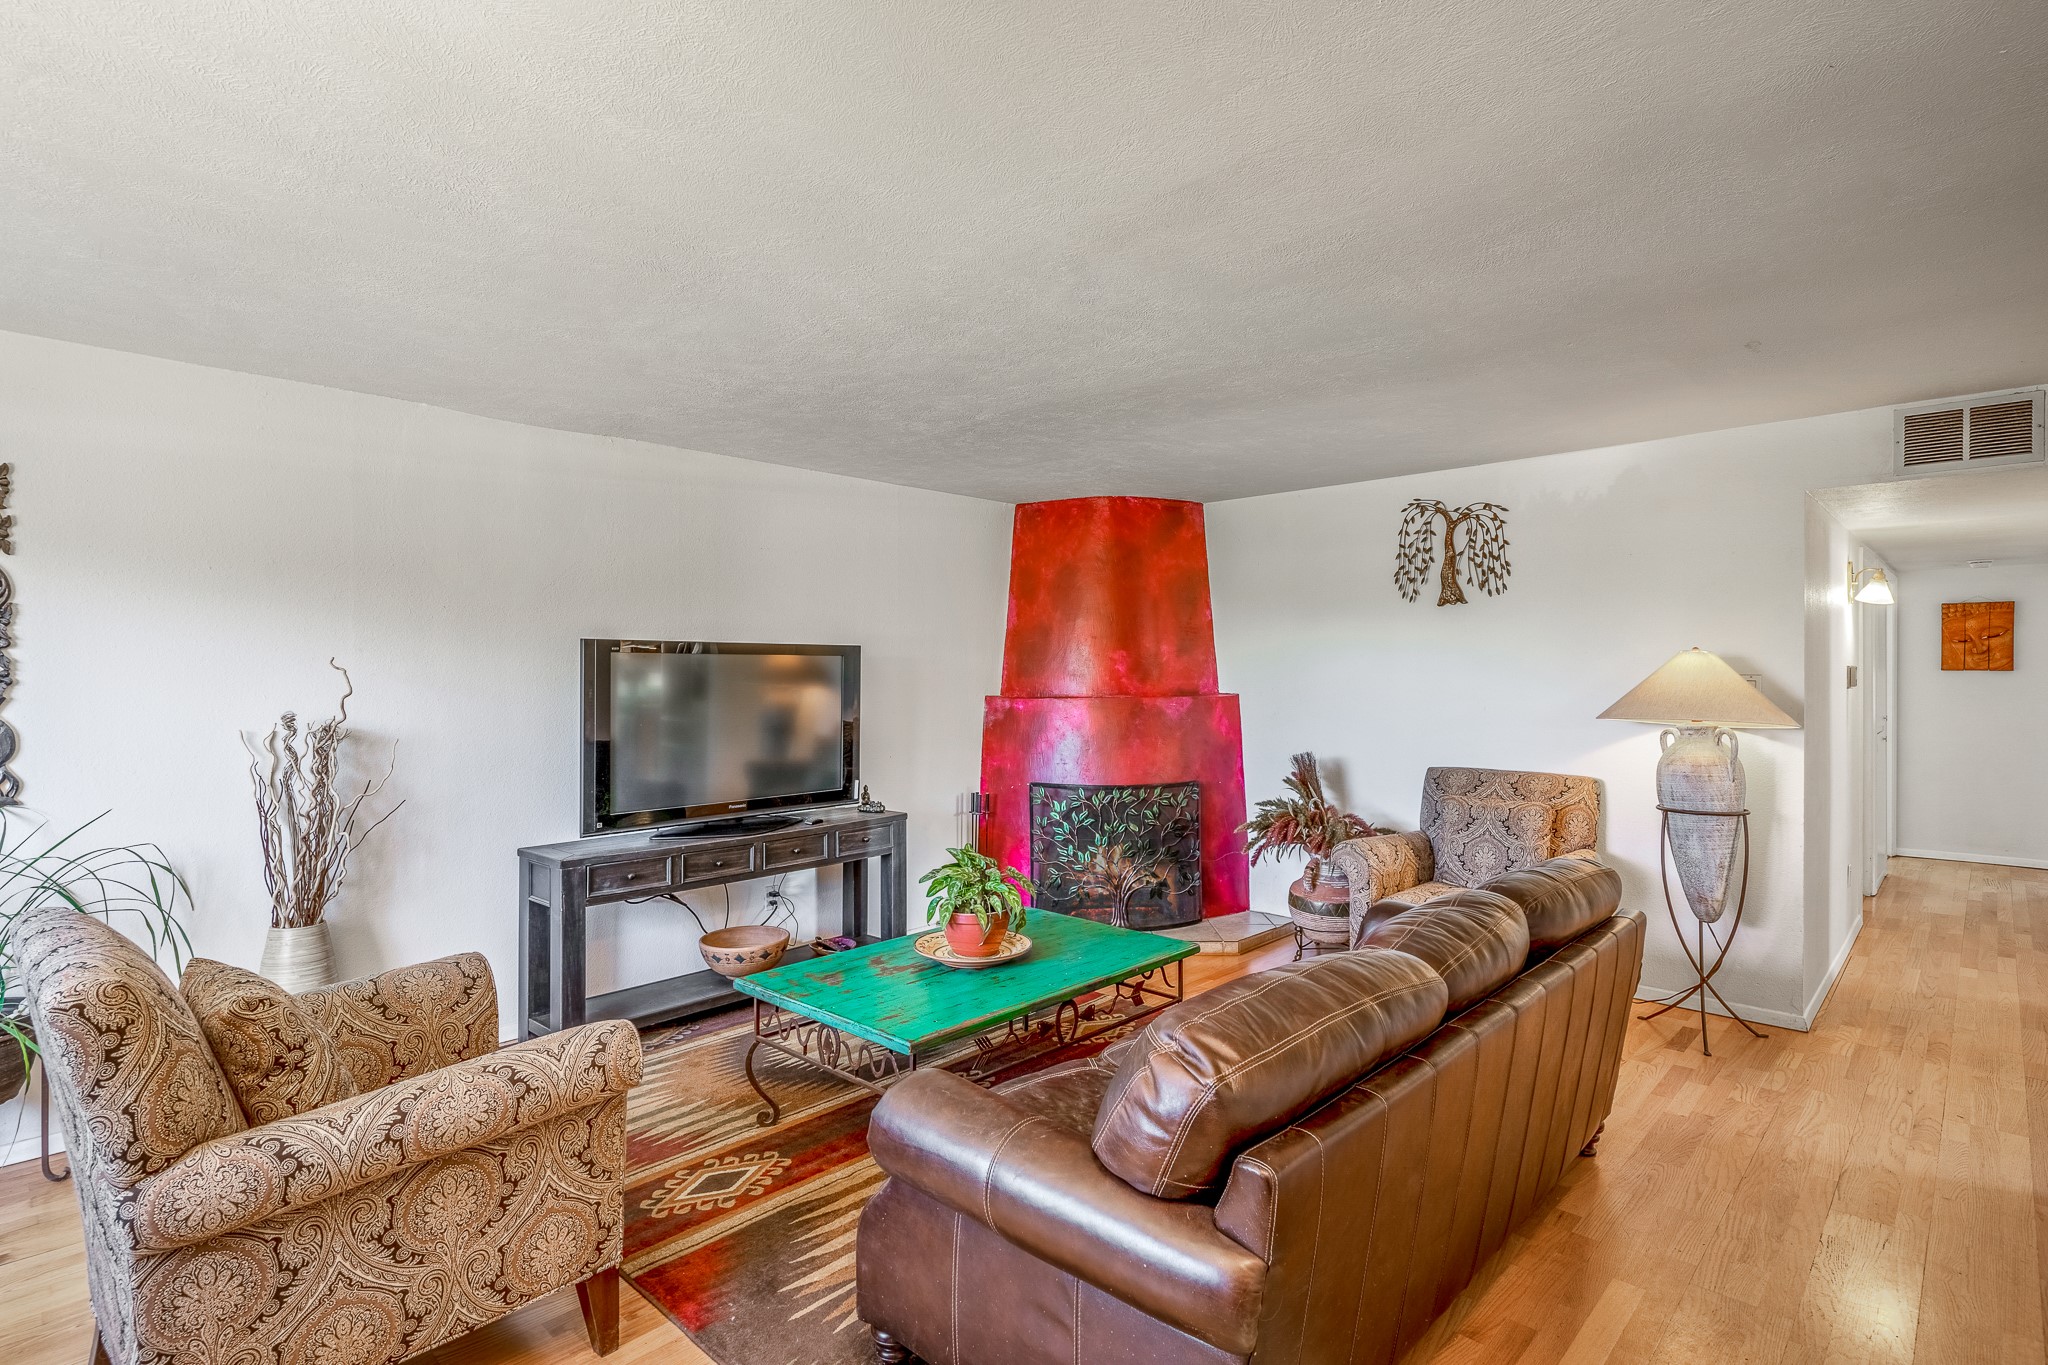 2075 Fifth Street, Santa Fe, New Mexico 87505, 3 Bedrooms Bedrooms, ,2 BathroomsBathrooms,Residential,For Sale,2075 Fifth Street,202336540